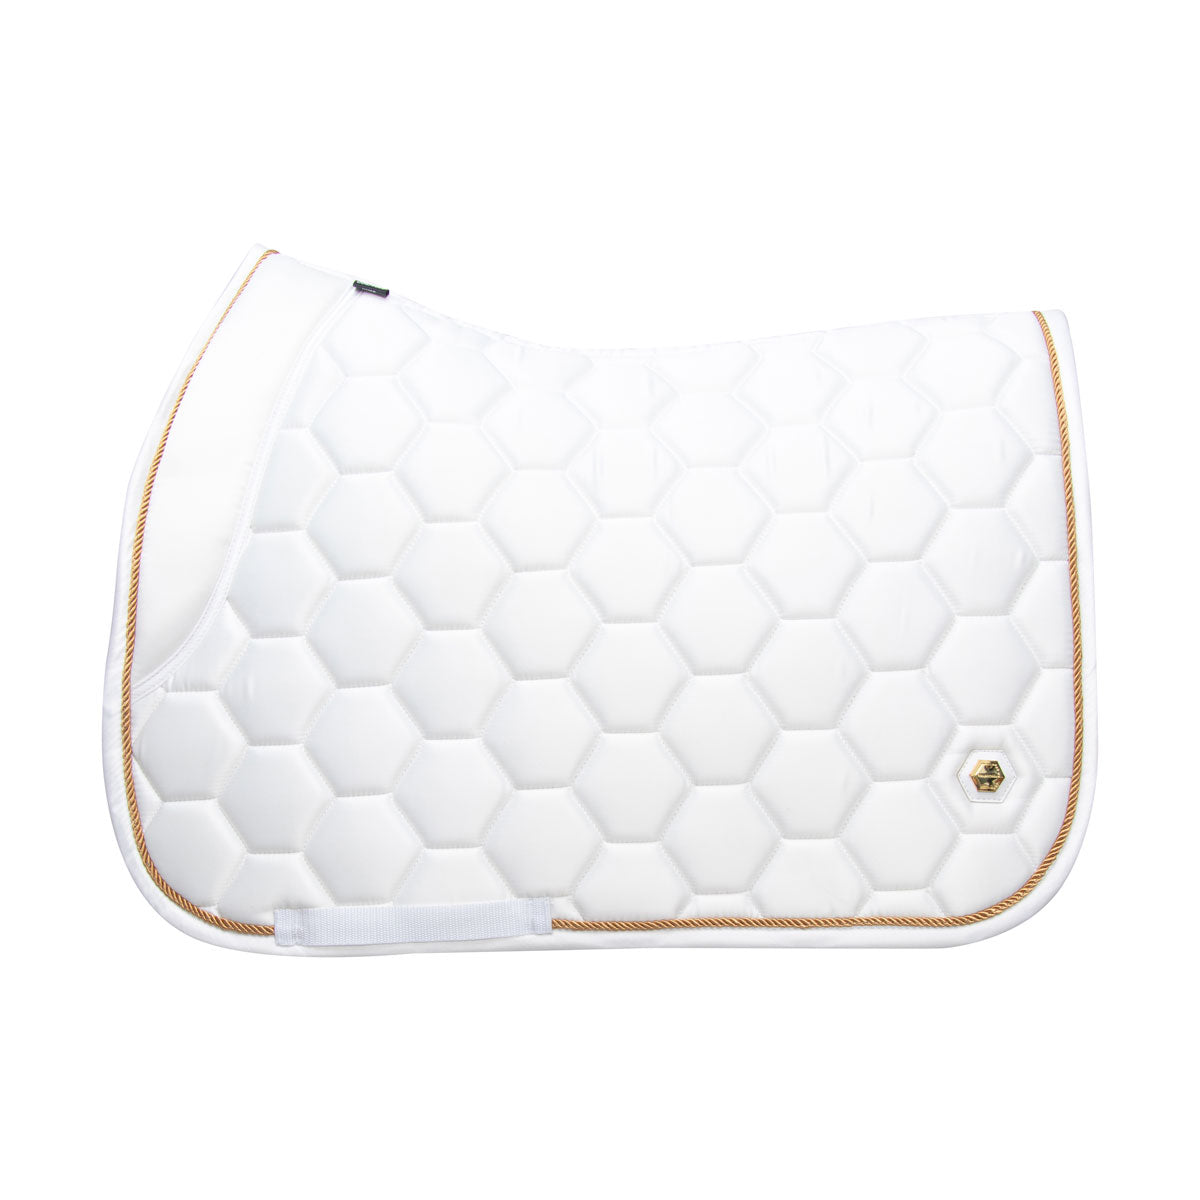 Coldstream Marygold Gp Saddle Pad - Just Horse Riders